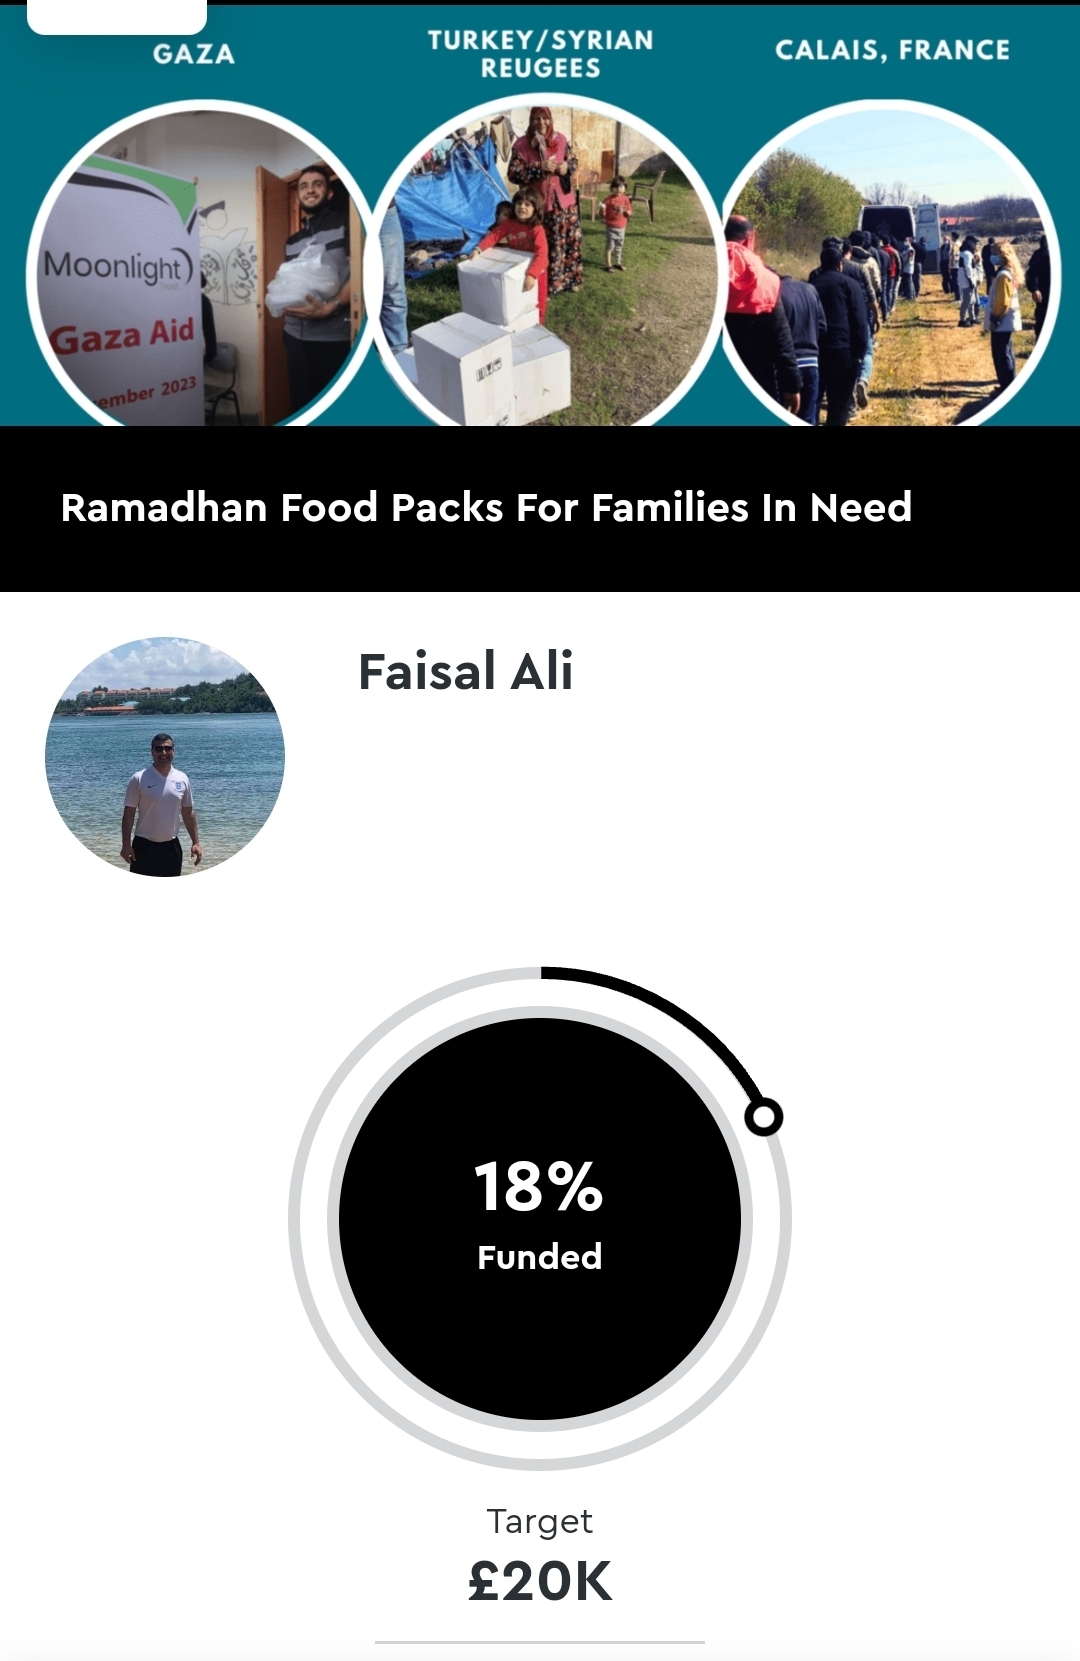 Support Faisal Ali in his efforts to raise vital funds